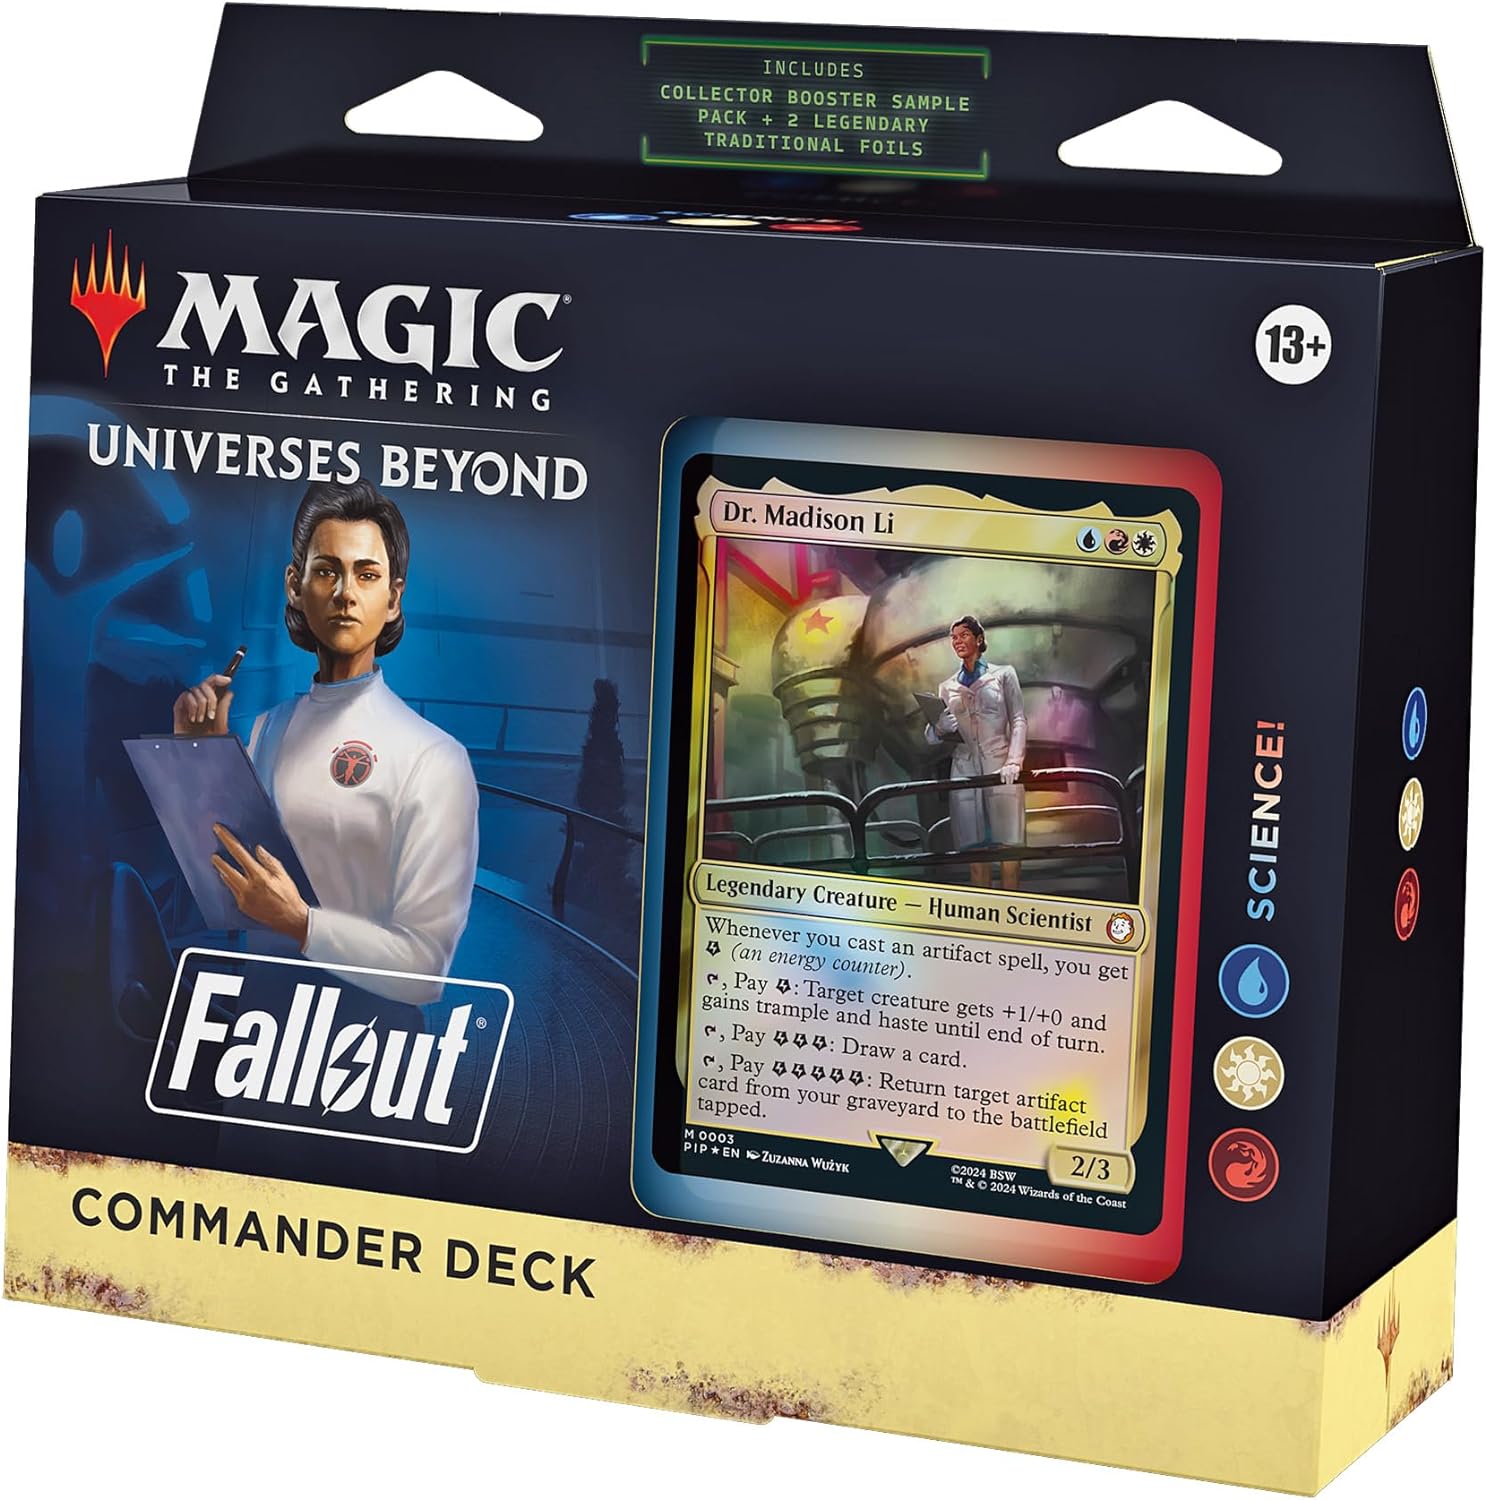 Magic The Gathering - Fallout Commander Deck Science! MKCORGM042 |0|